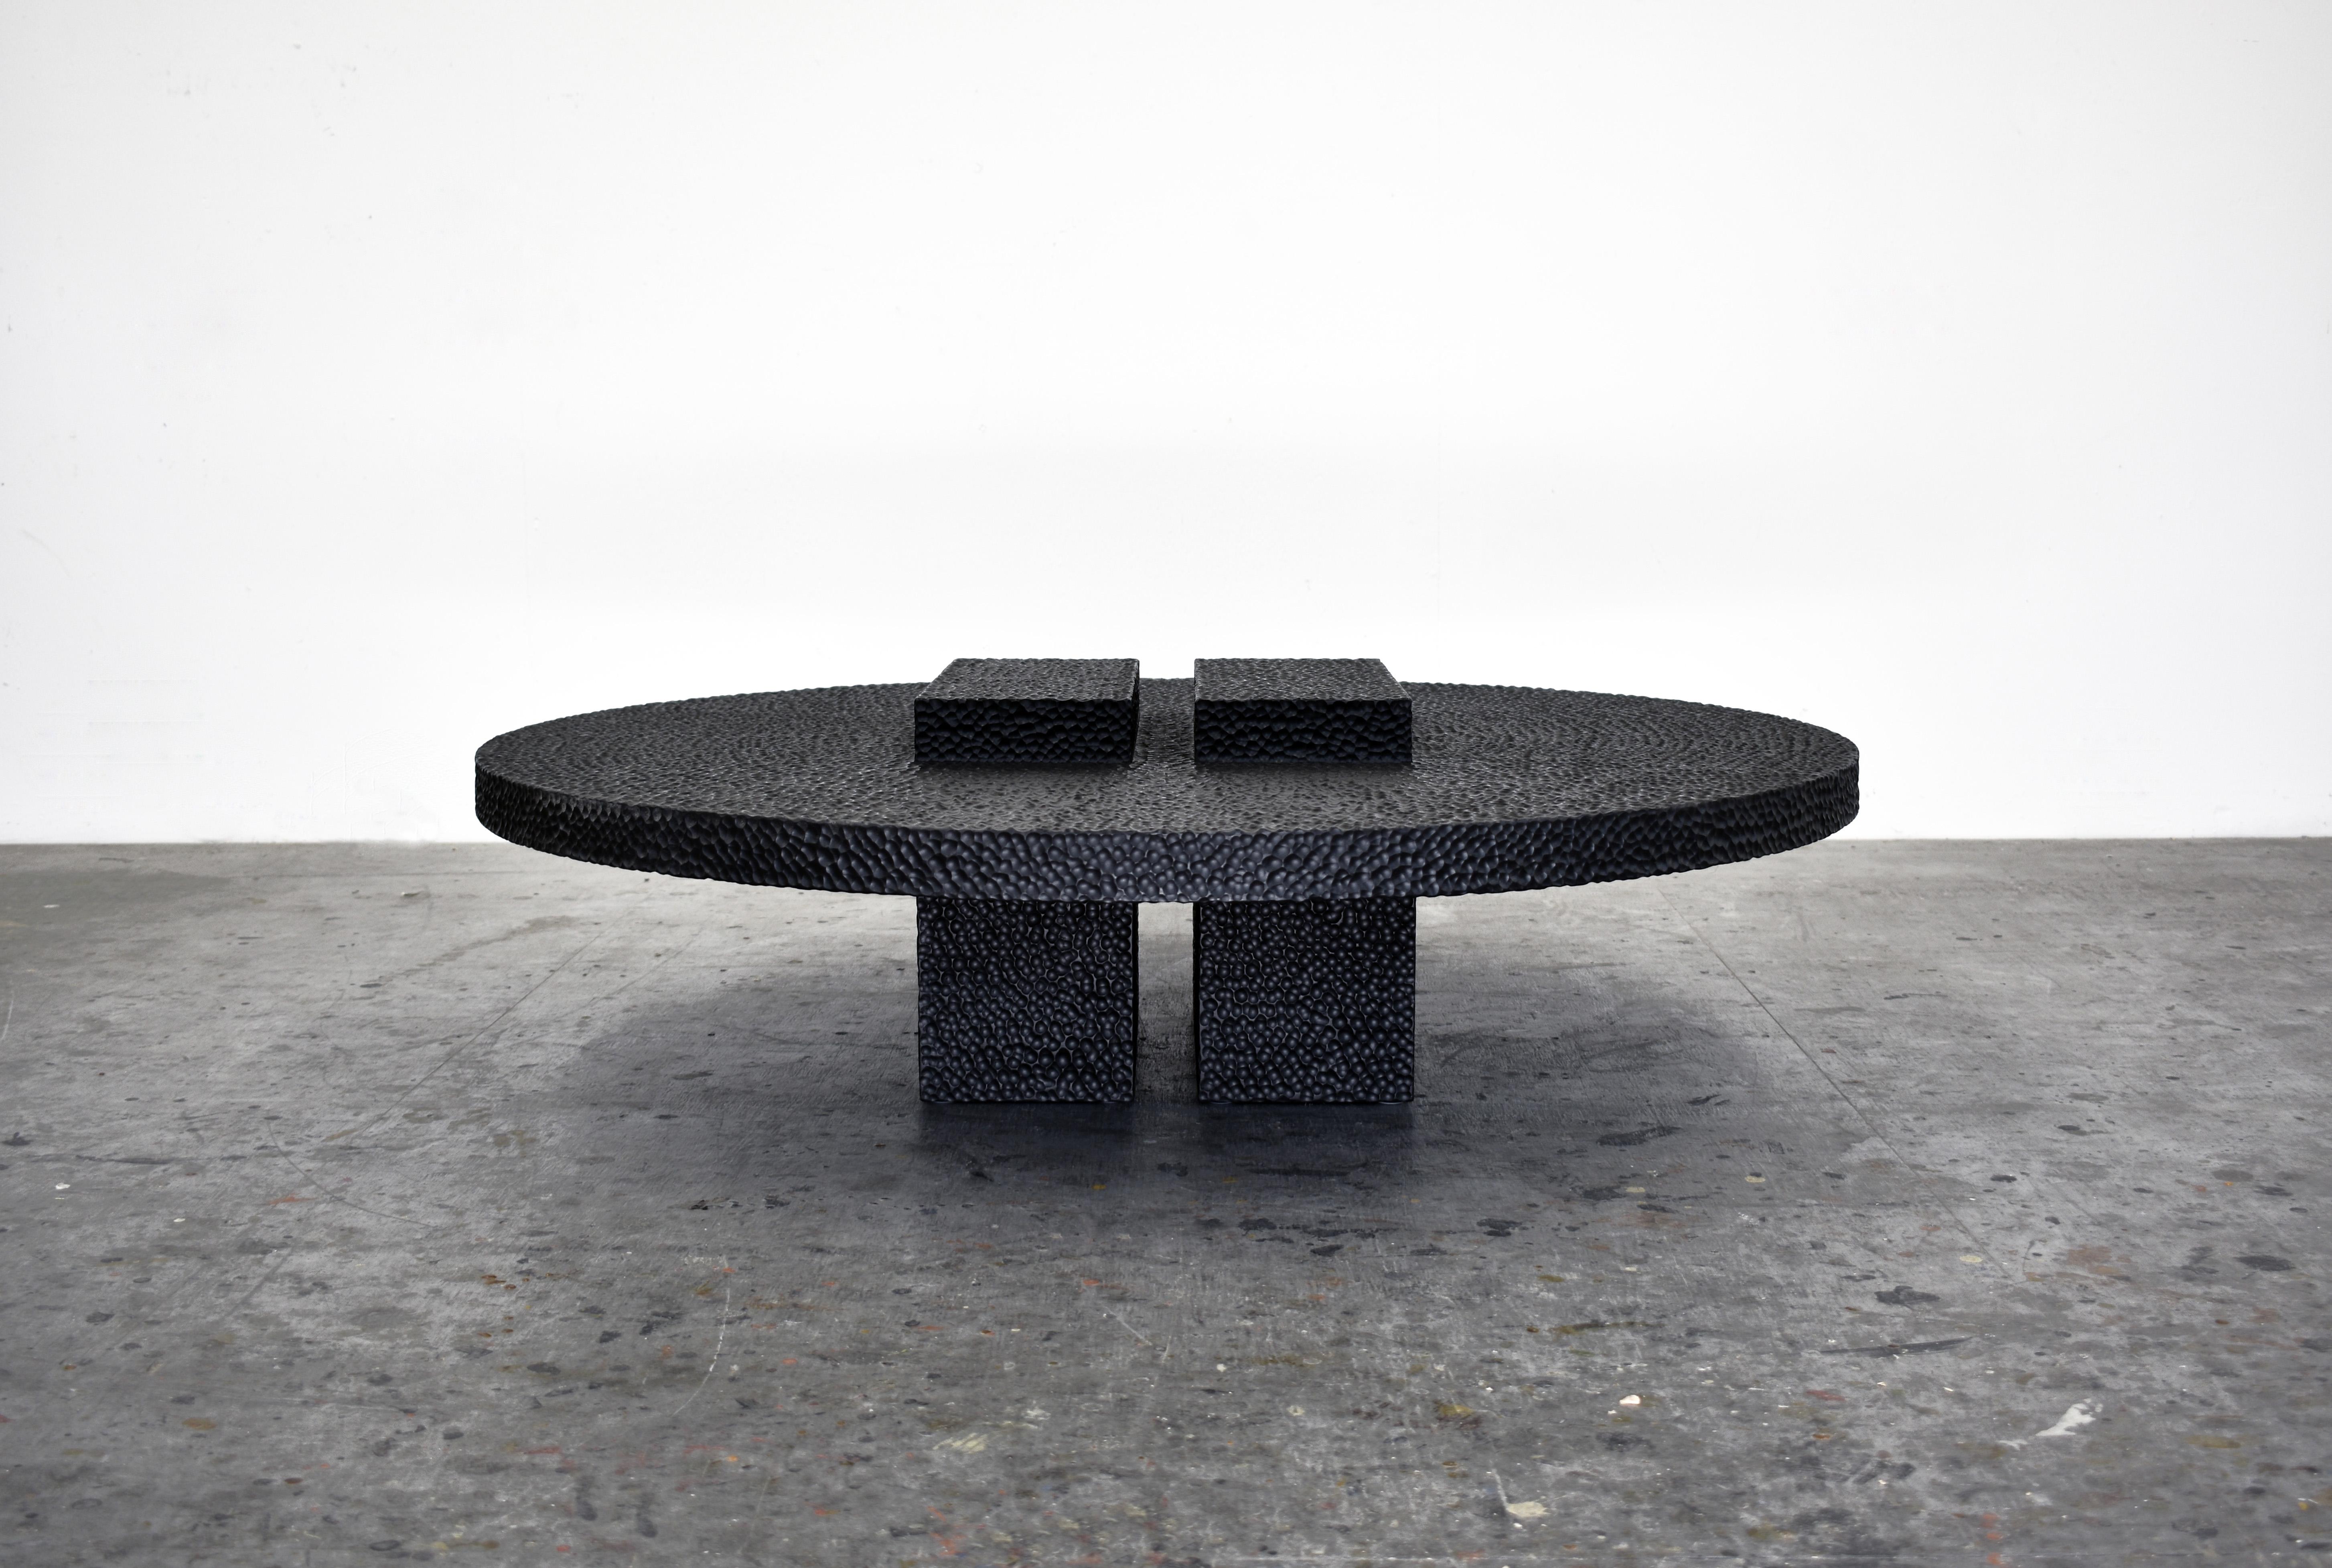 R3 table
Carved, blackened, lacquered and maple
Measures: 13